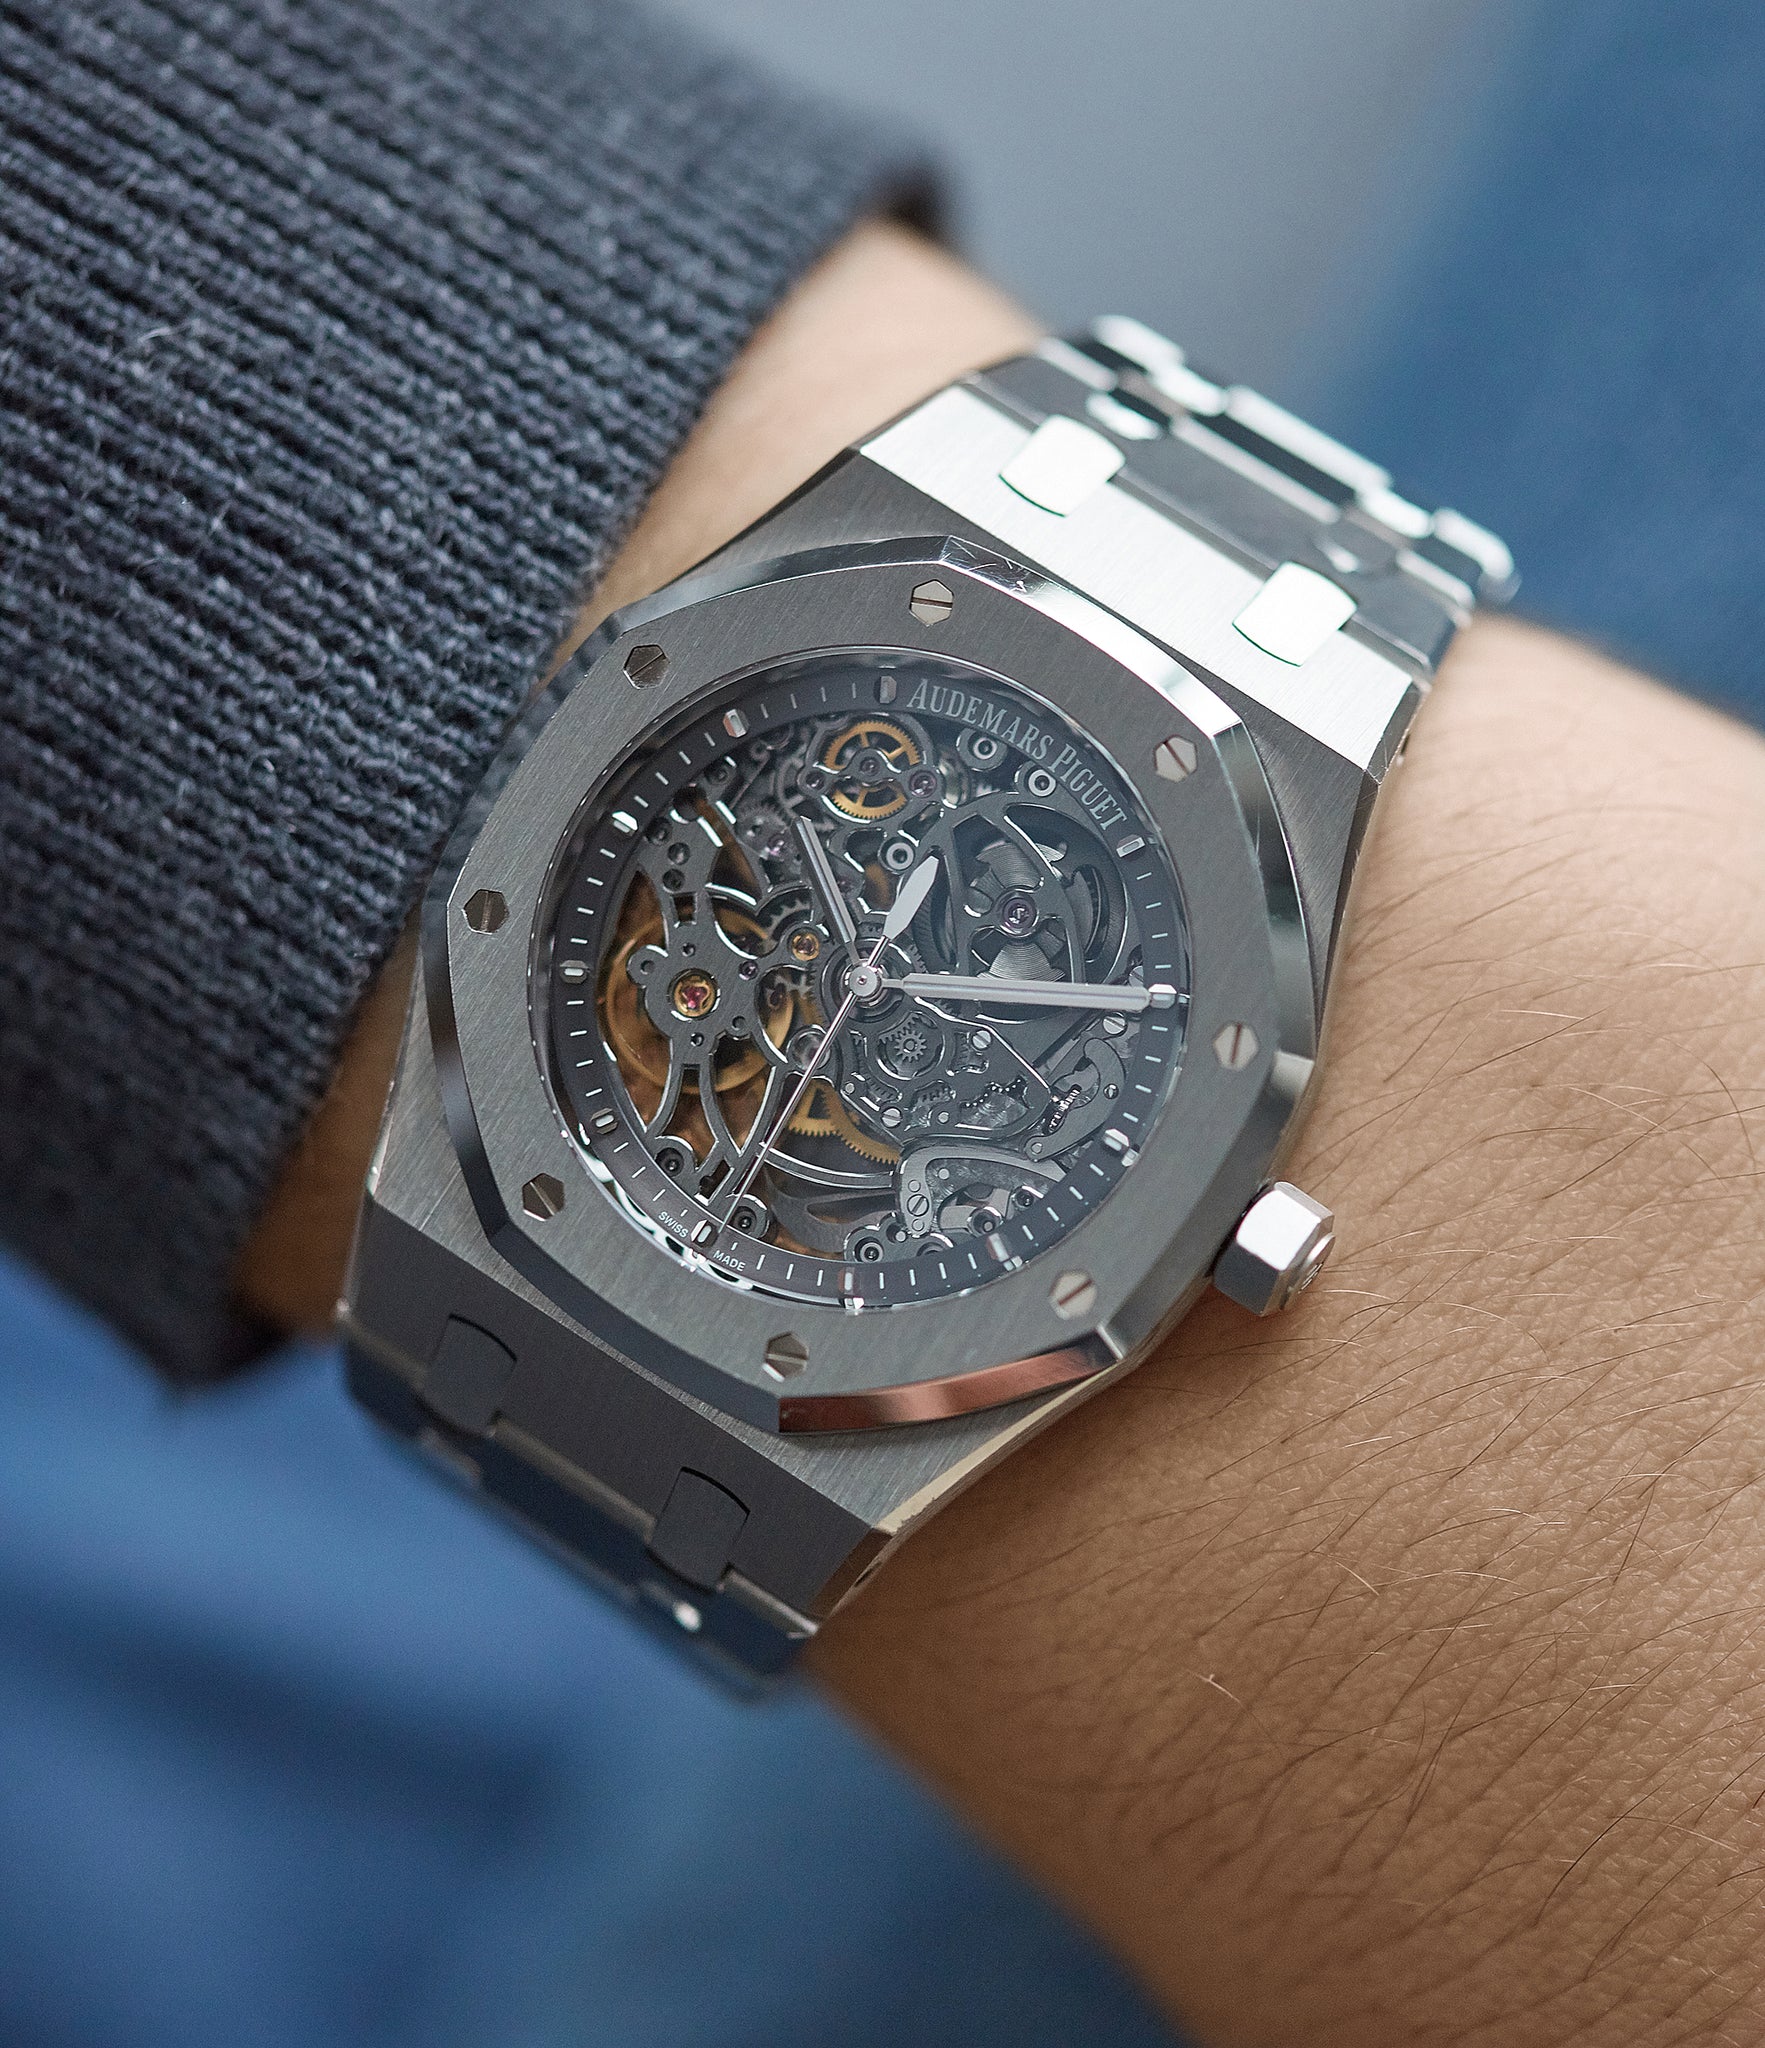 on the wrist Audemars Piguet Royal Oak skeletonised 15305ST steel watch for sale online at A Collected Man London UK specialist of rare watches